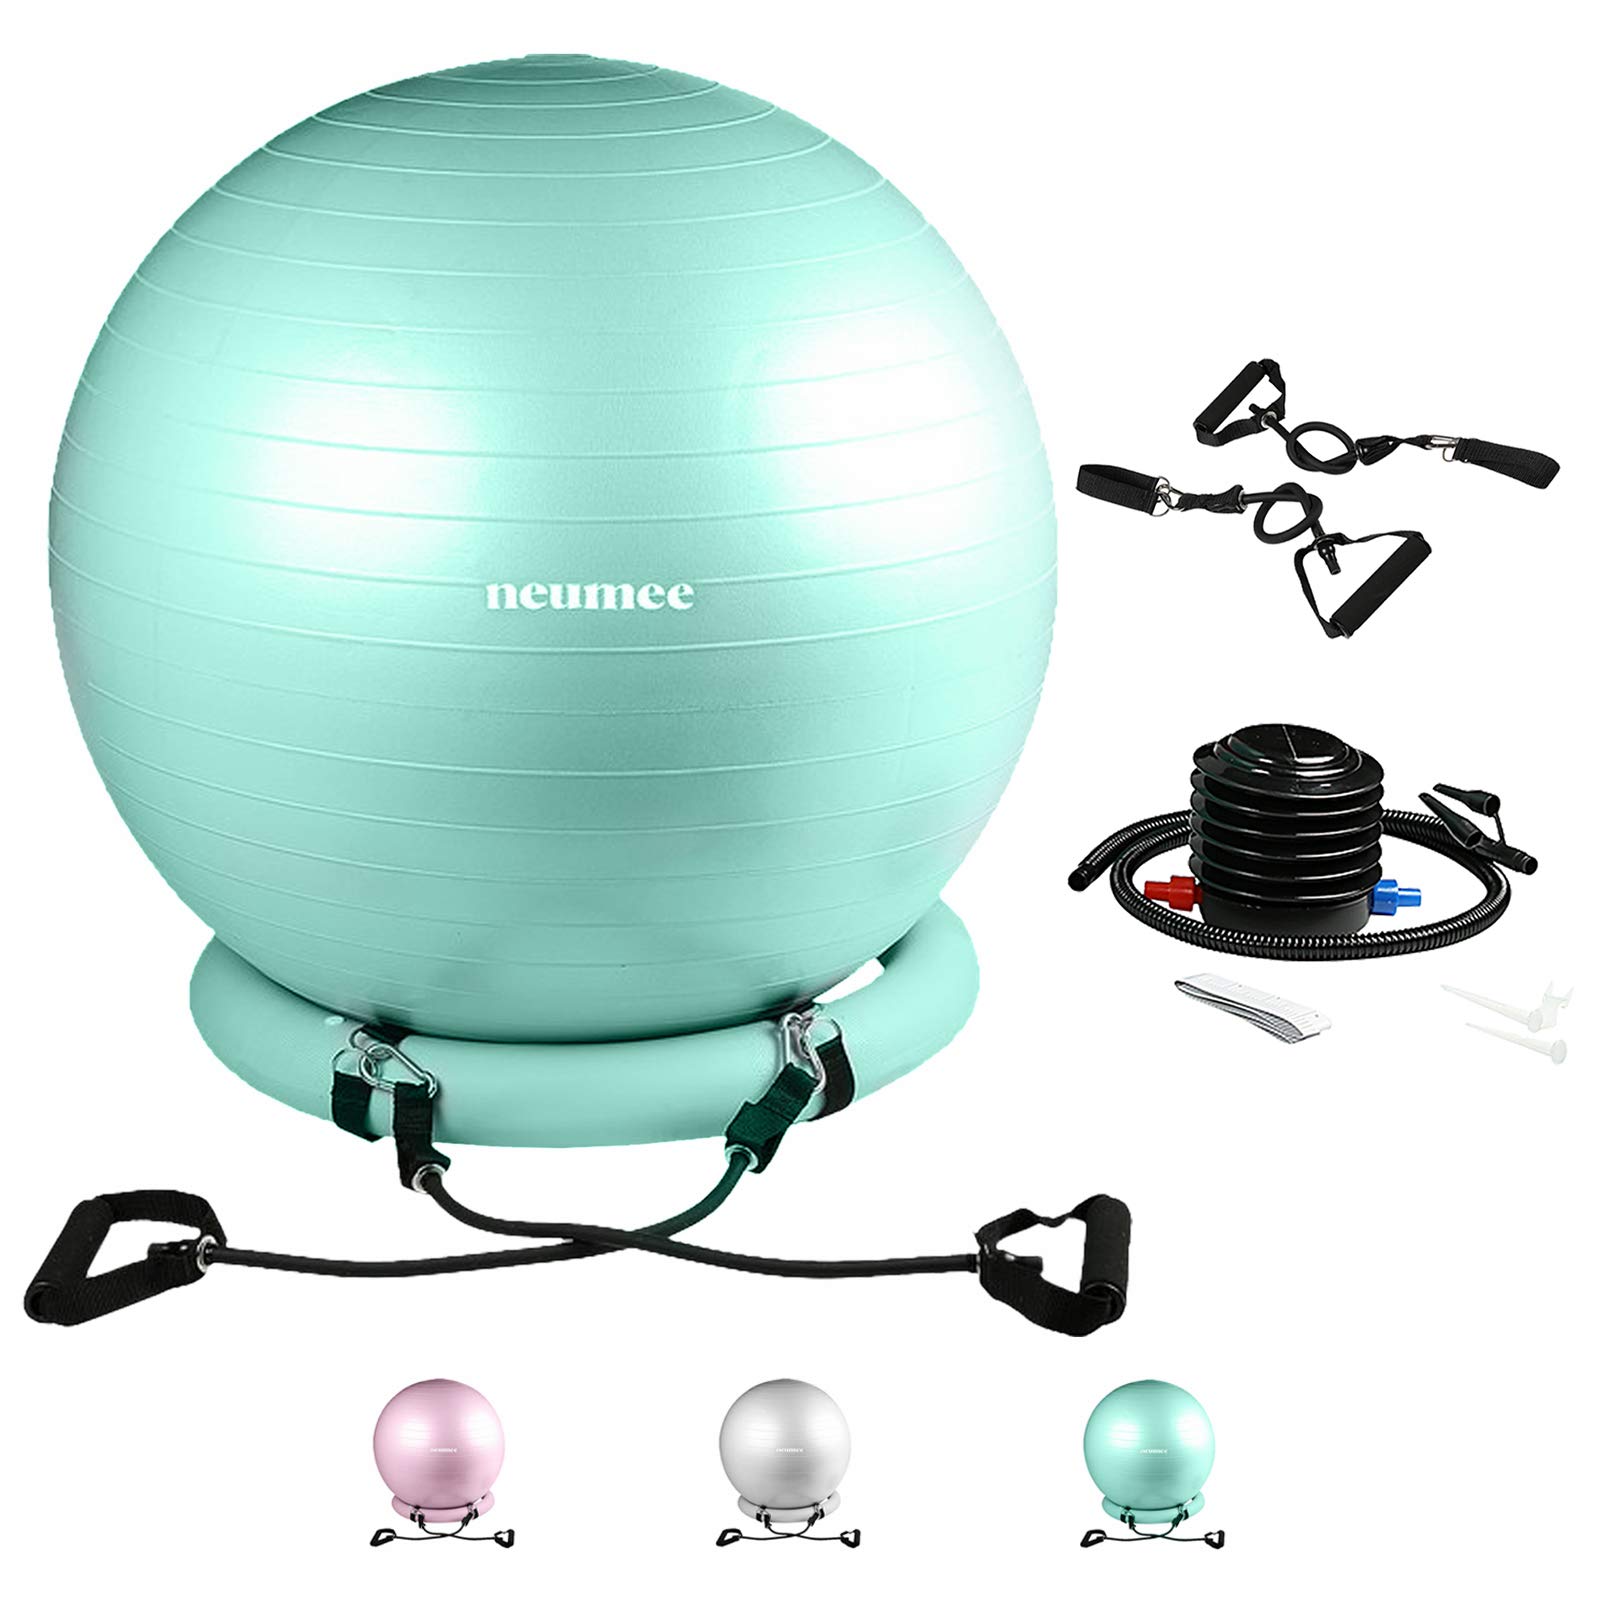 NEUMEE Exercise Ball Chair with Resistance Bands, Yoga Ball Office Chair with Stability Base for Home Gym, Workout Ball for Fitness, Large Size 65 cm